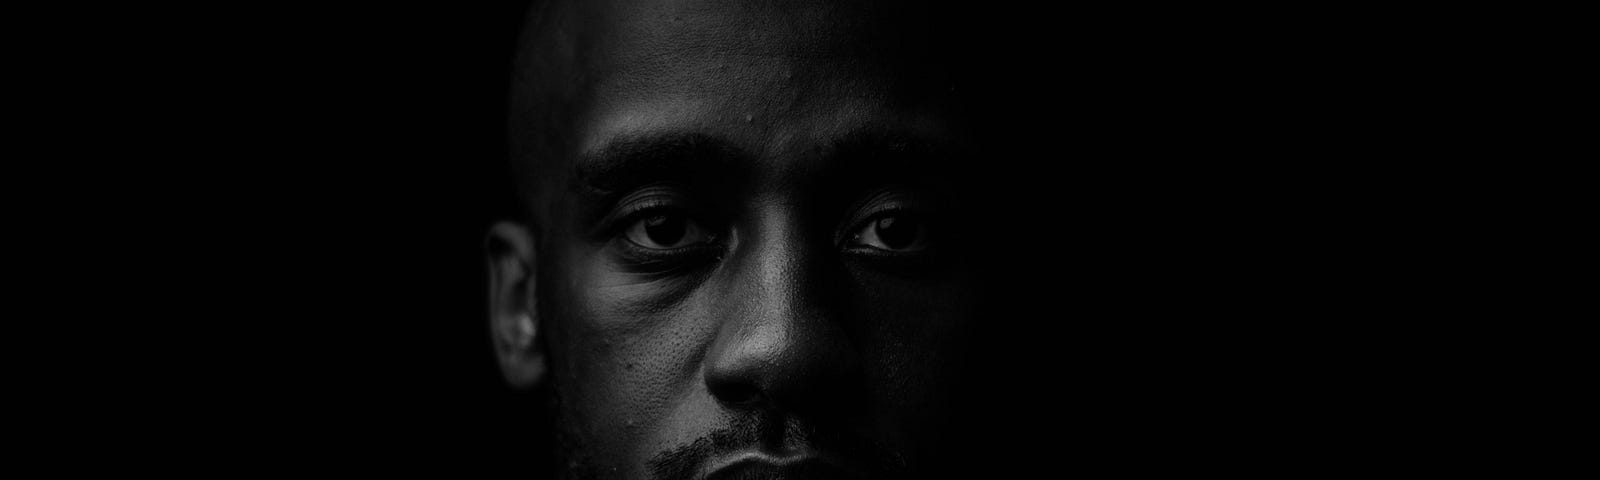 Close-up portrait of a young Black man against a black background.